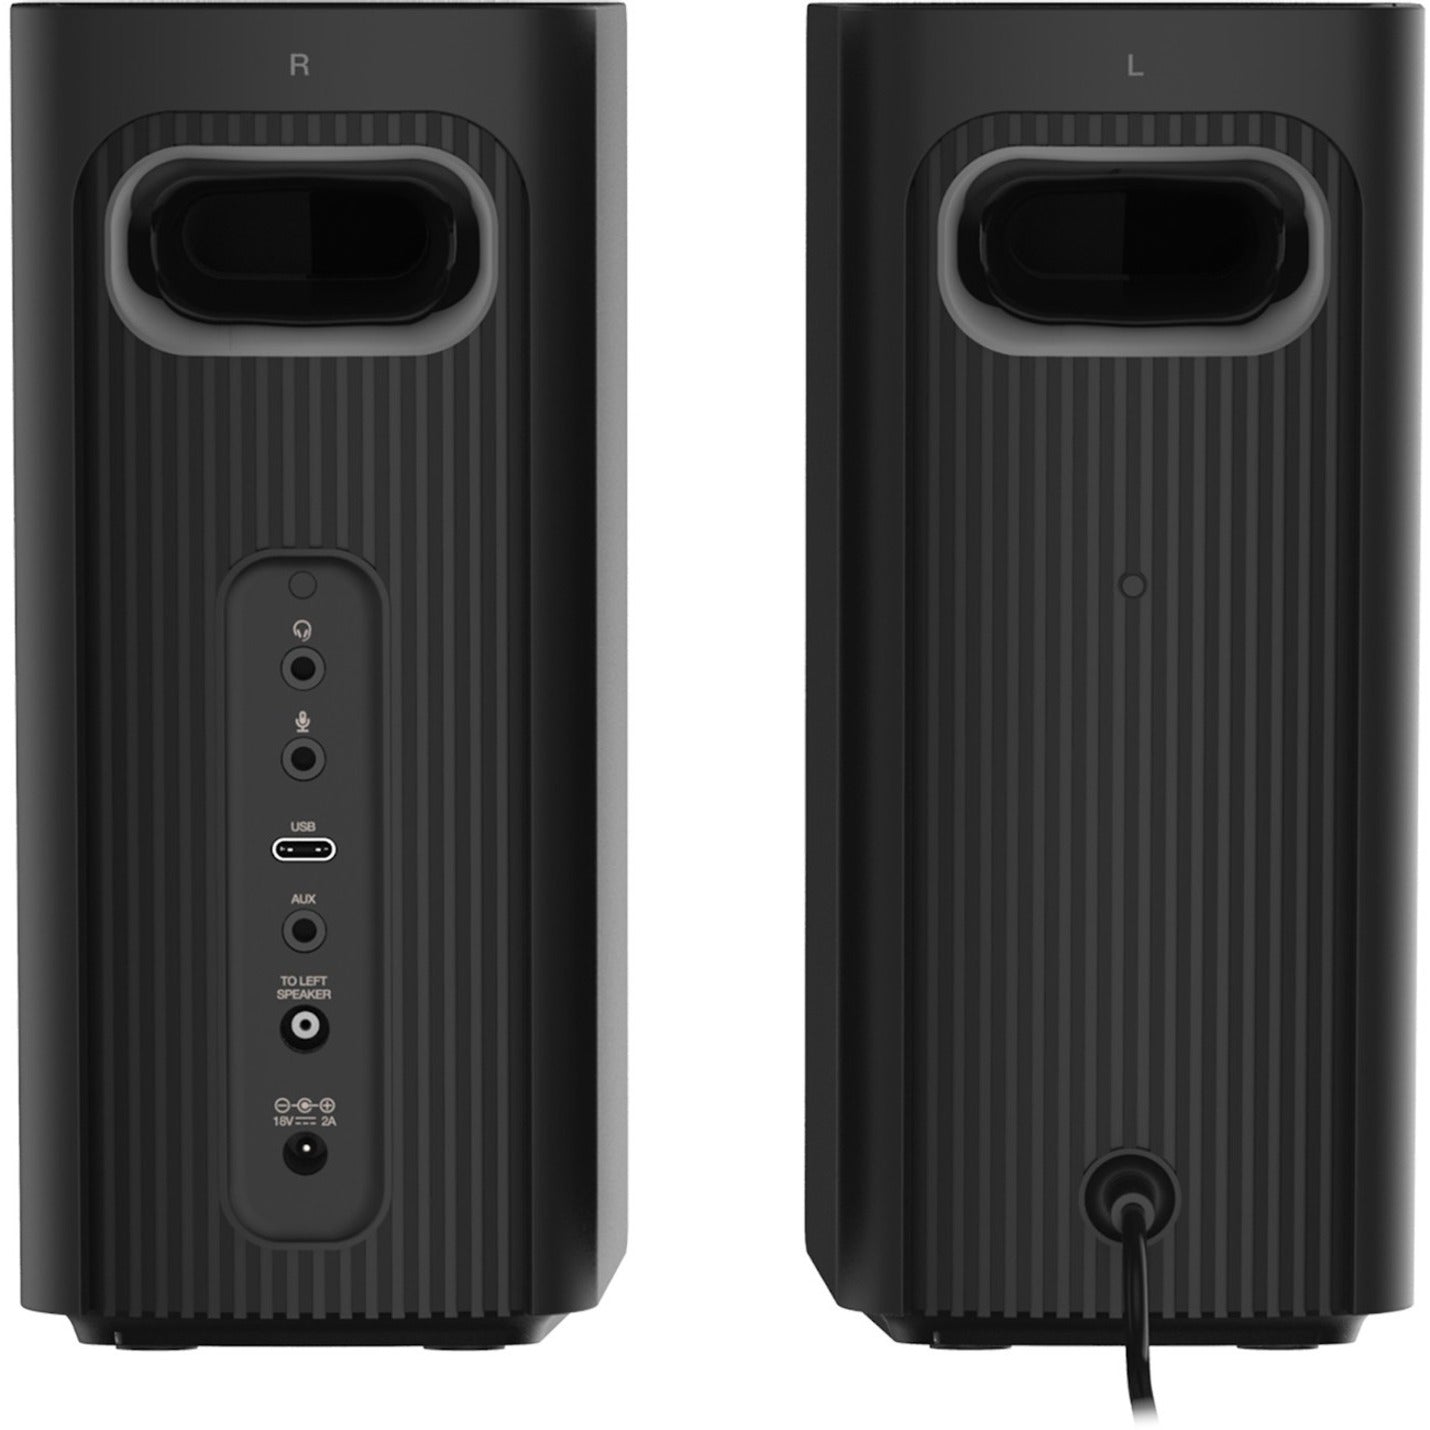 Creative 51MF1705AA000 T60 Speaker System, Wireless 2.0 Speaker with 30W RMS Output Power, BT 5.0 Retail